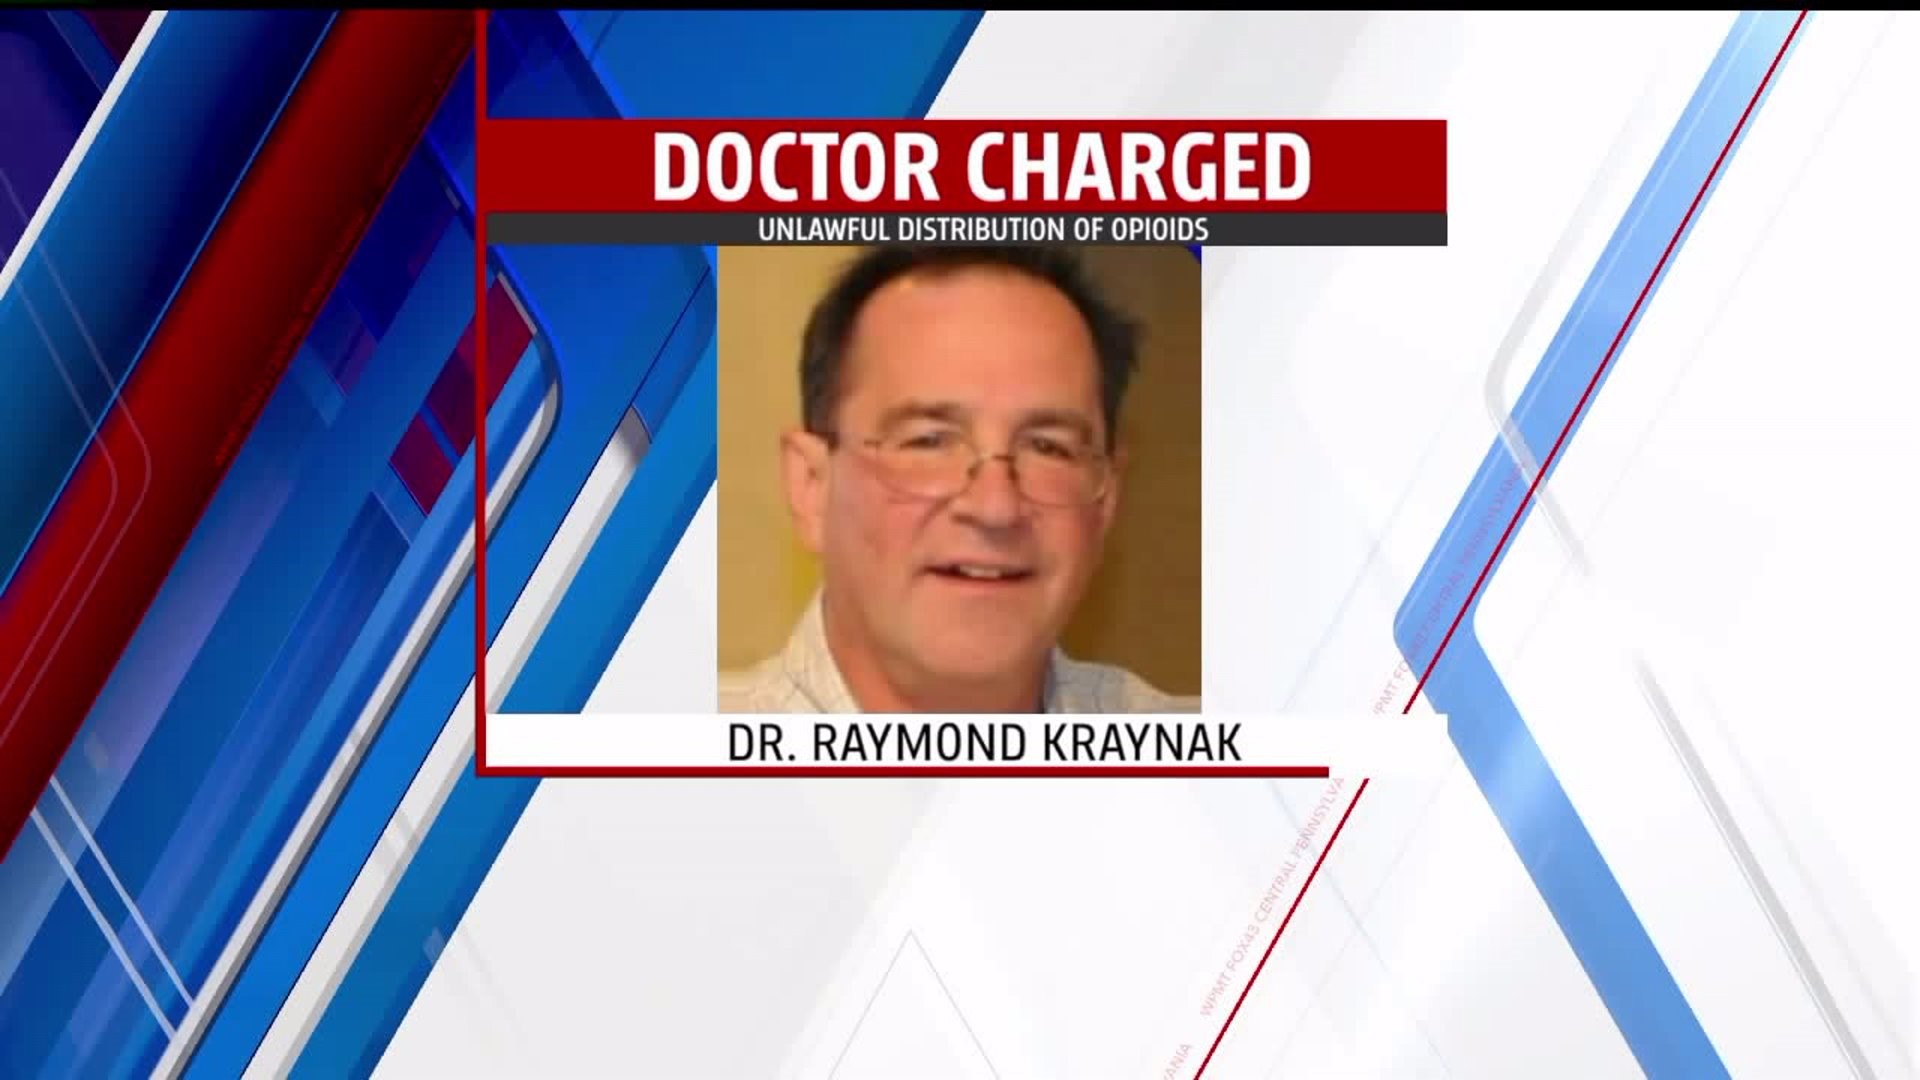 PA doctor indicted on charges related to opioid deaths